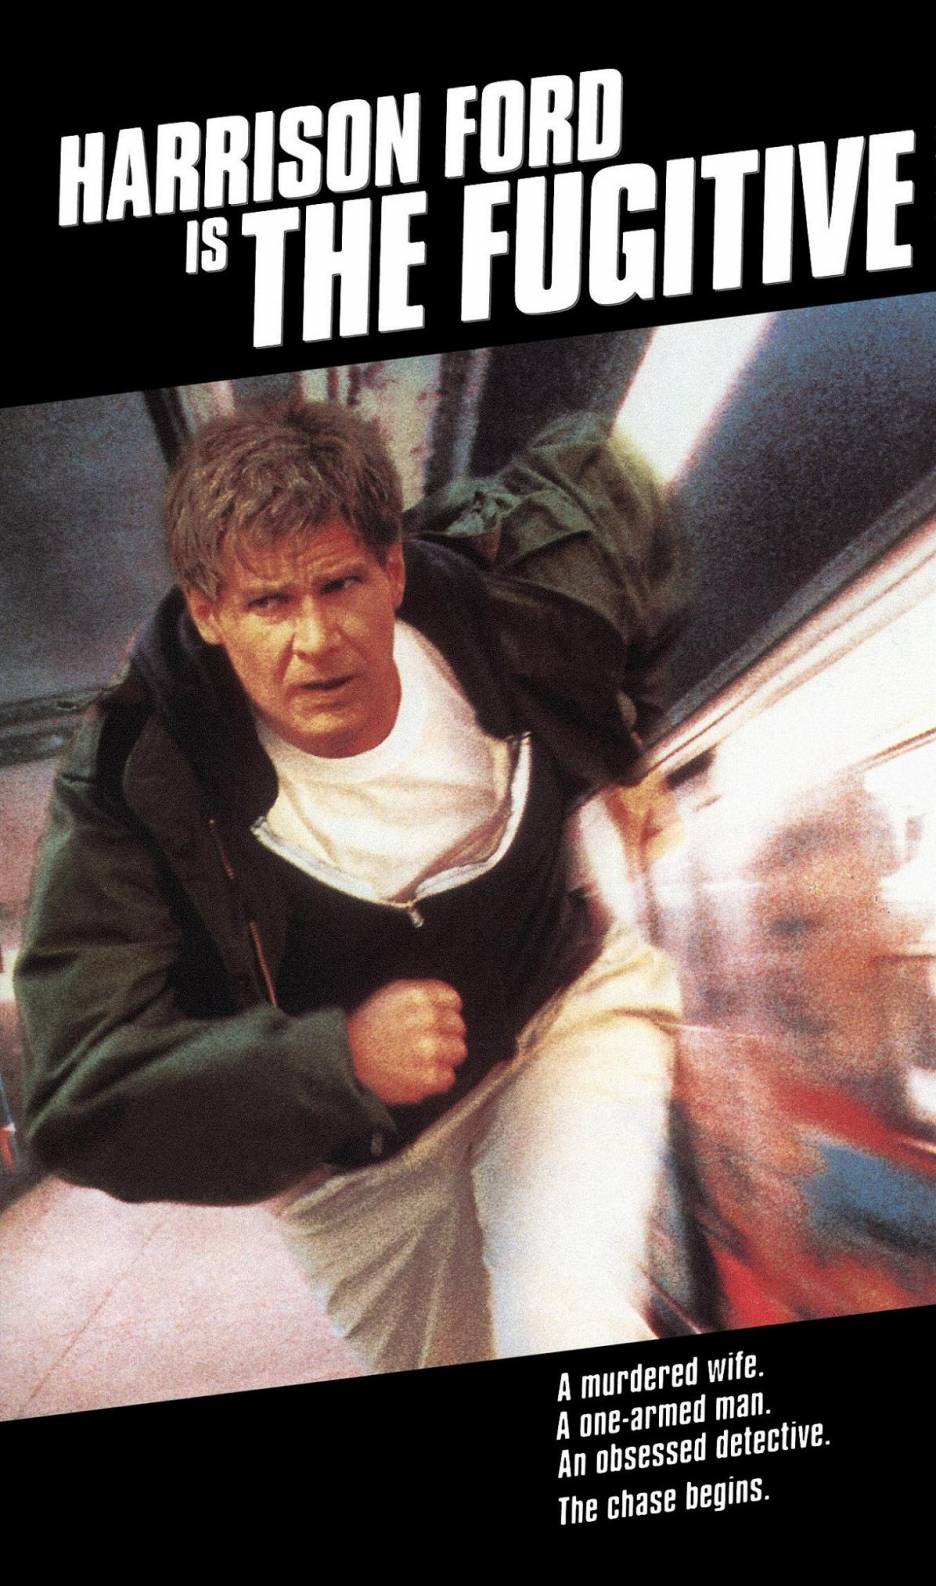 The Fugitive Movie Poster